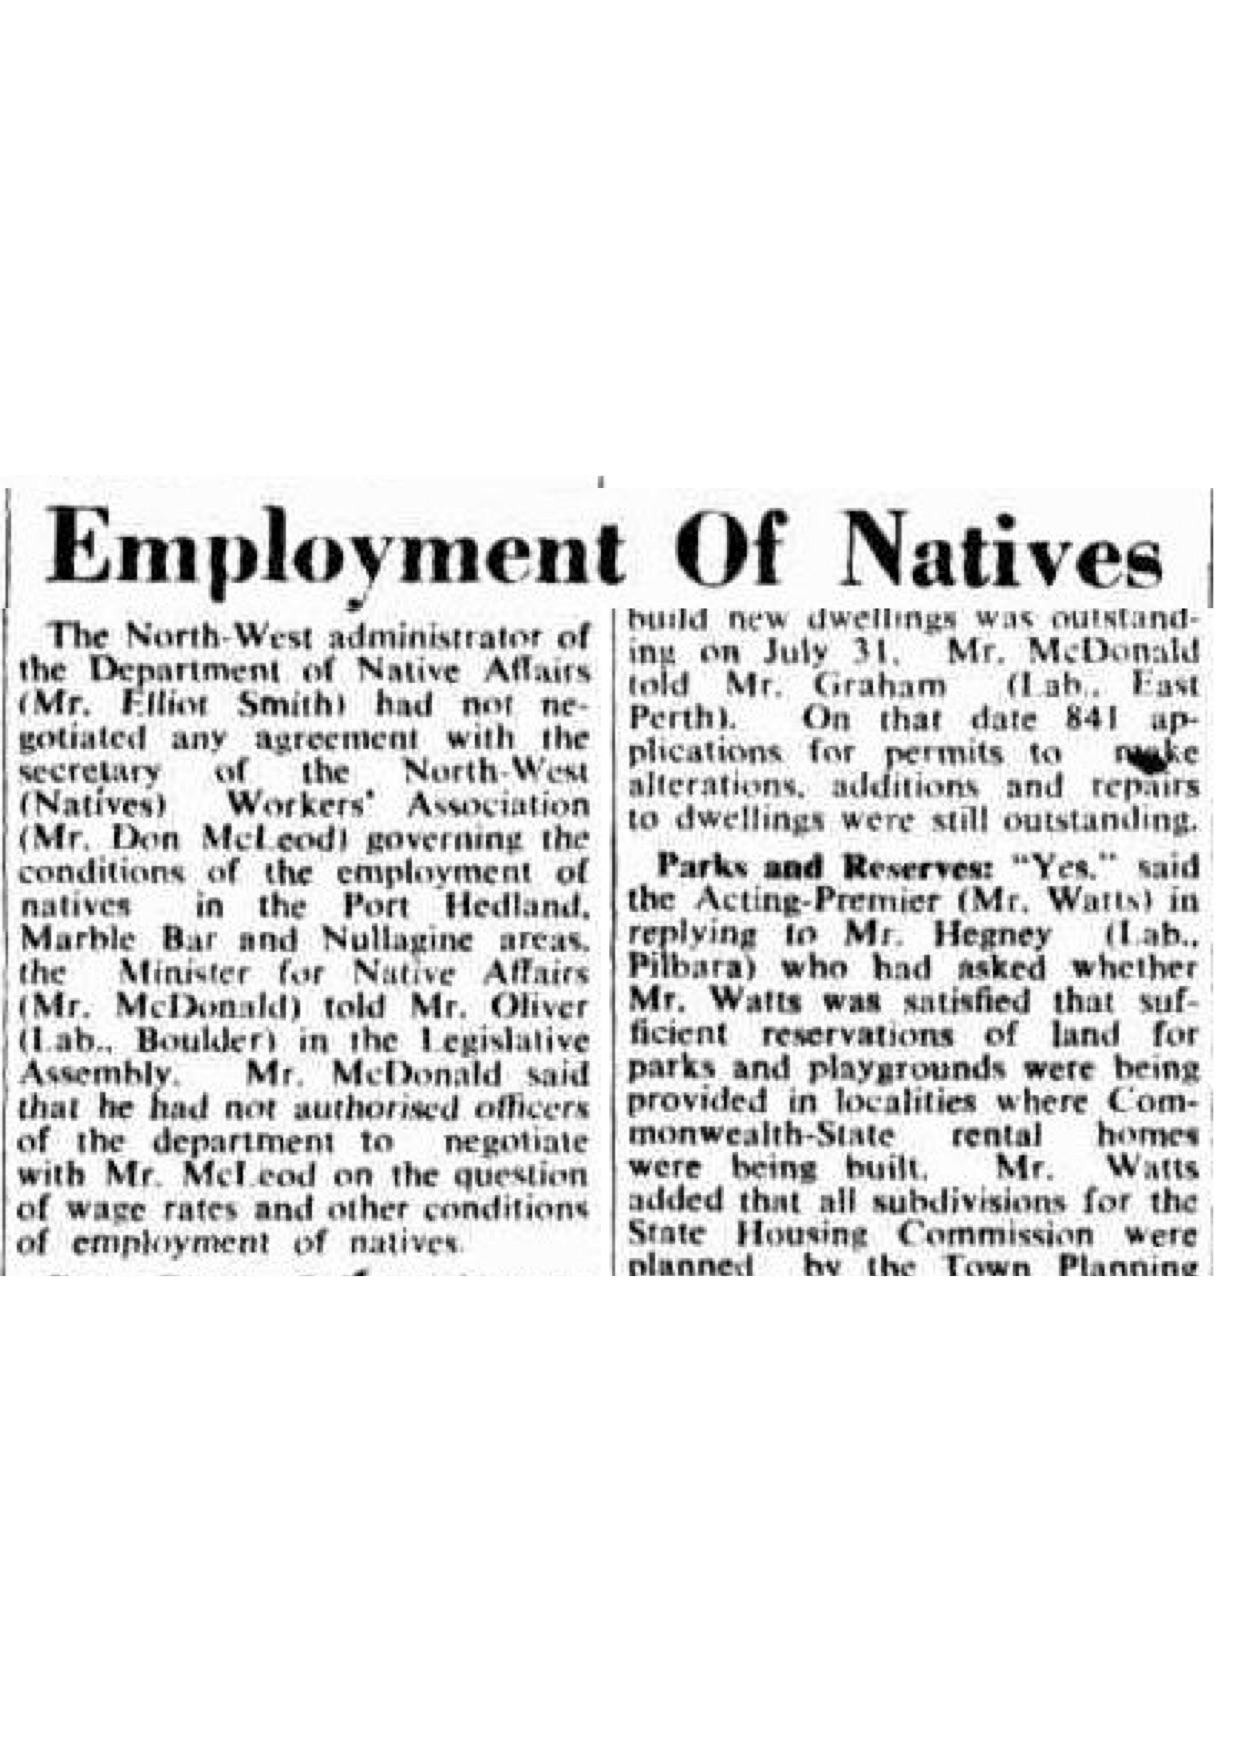 Employment of Natives newspaper article